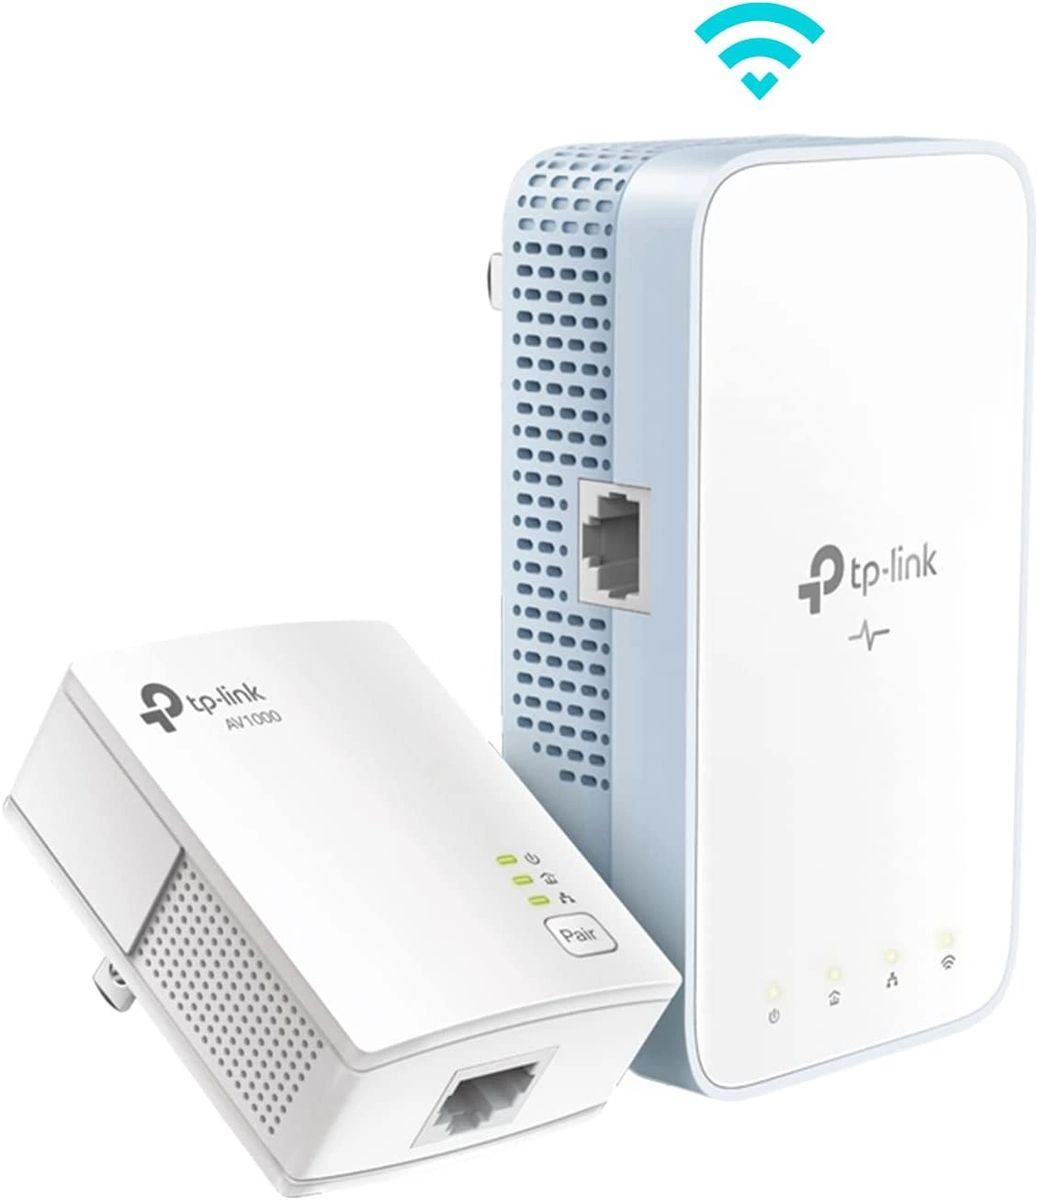 TP-Link Powerline WiFi - AV1000 Powerline Ethernet Adapter with Dual Band